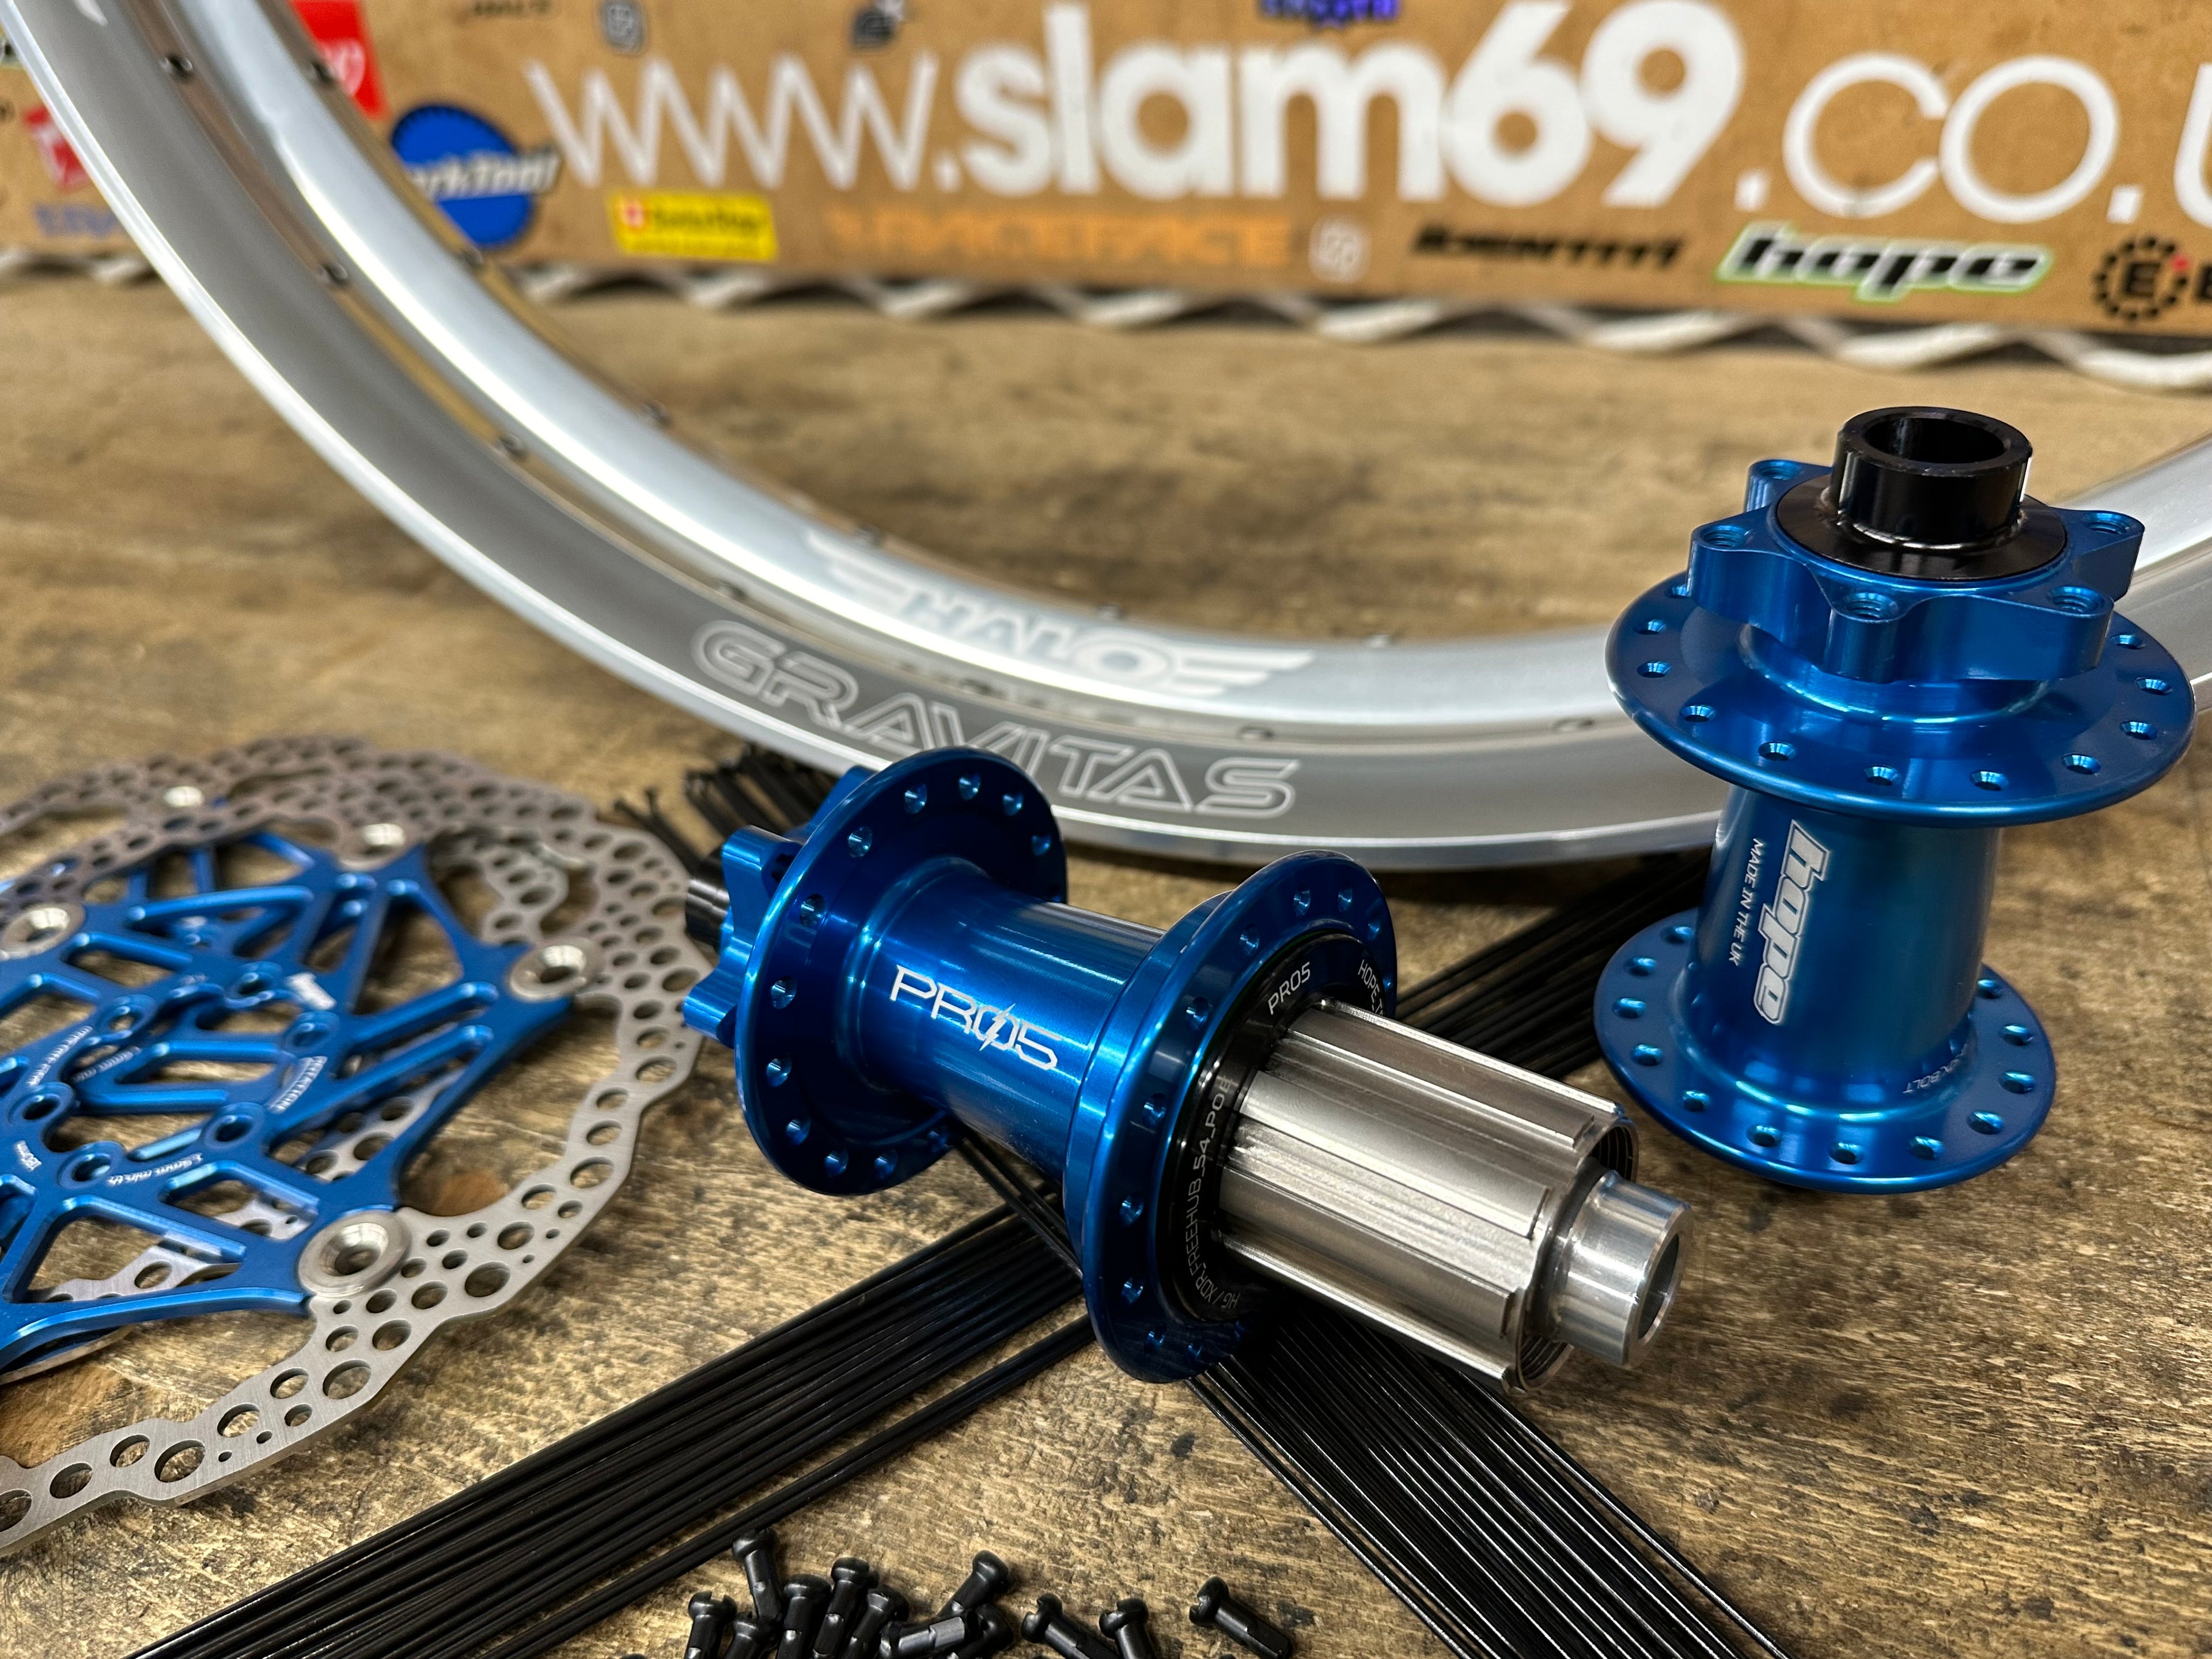 Halo Gravitas Silver Rims with Hope Pro 5 Ebike Hubs in Blue and matching blue floating hope rotors